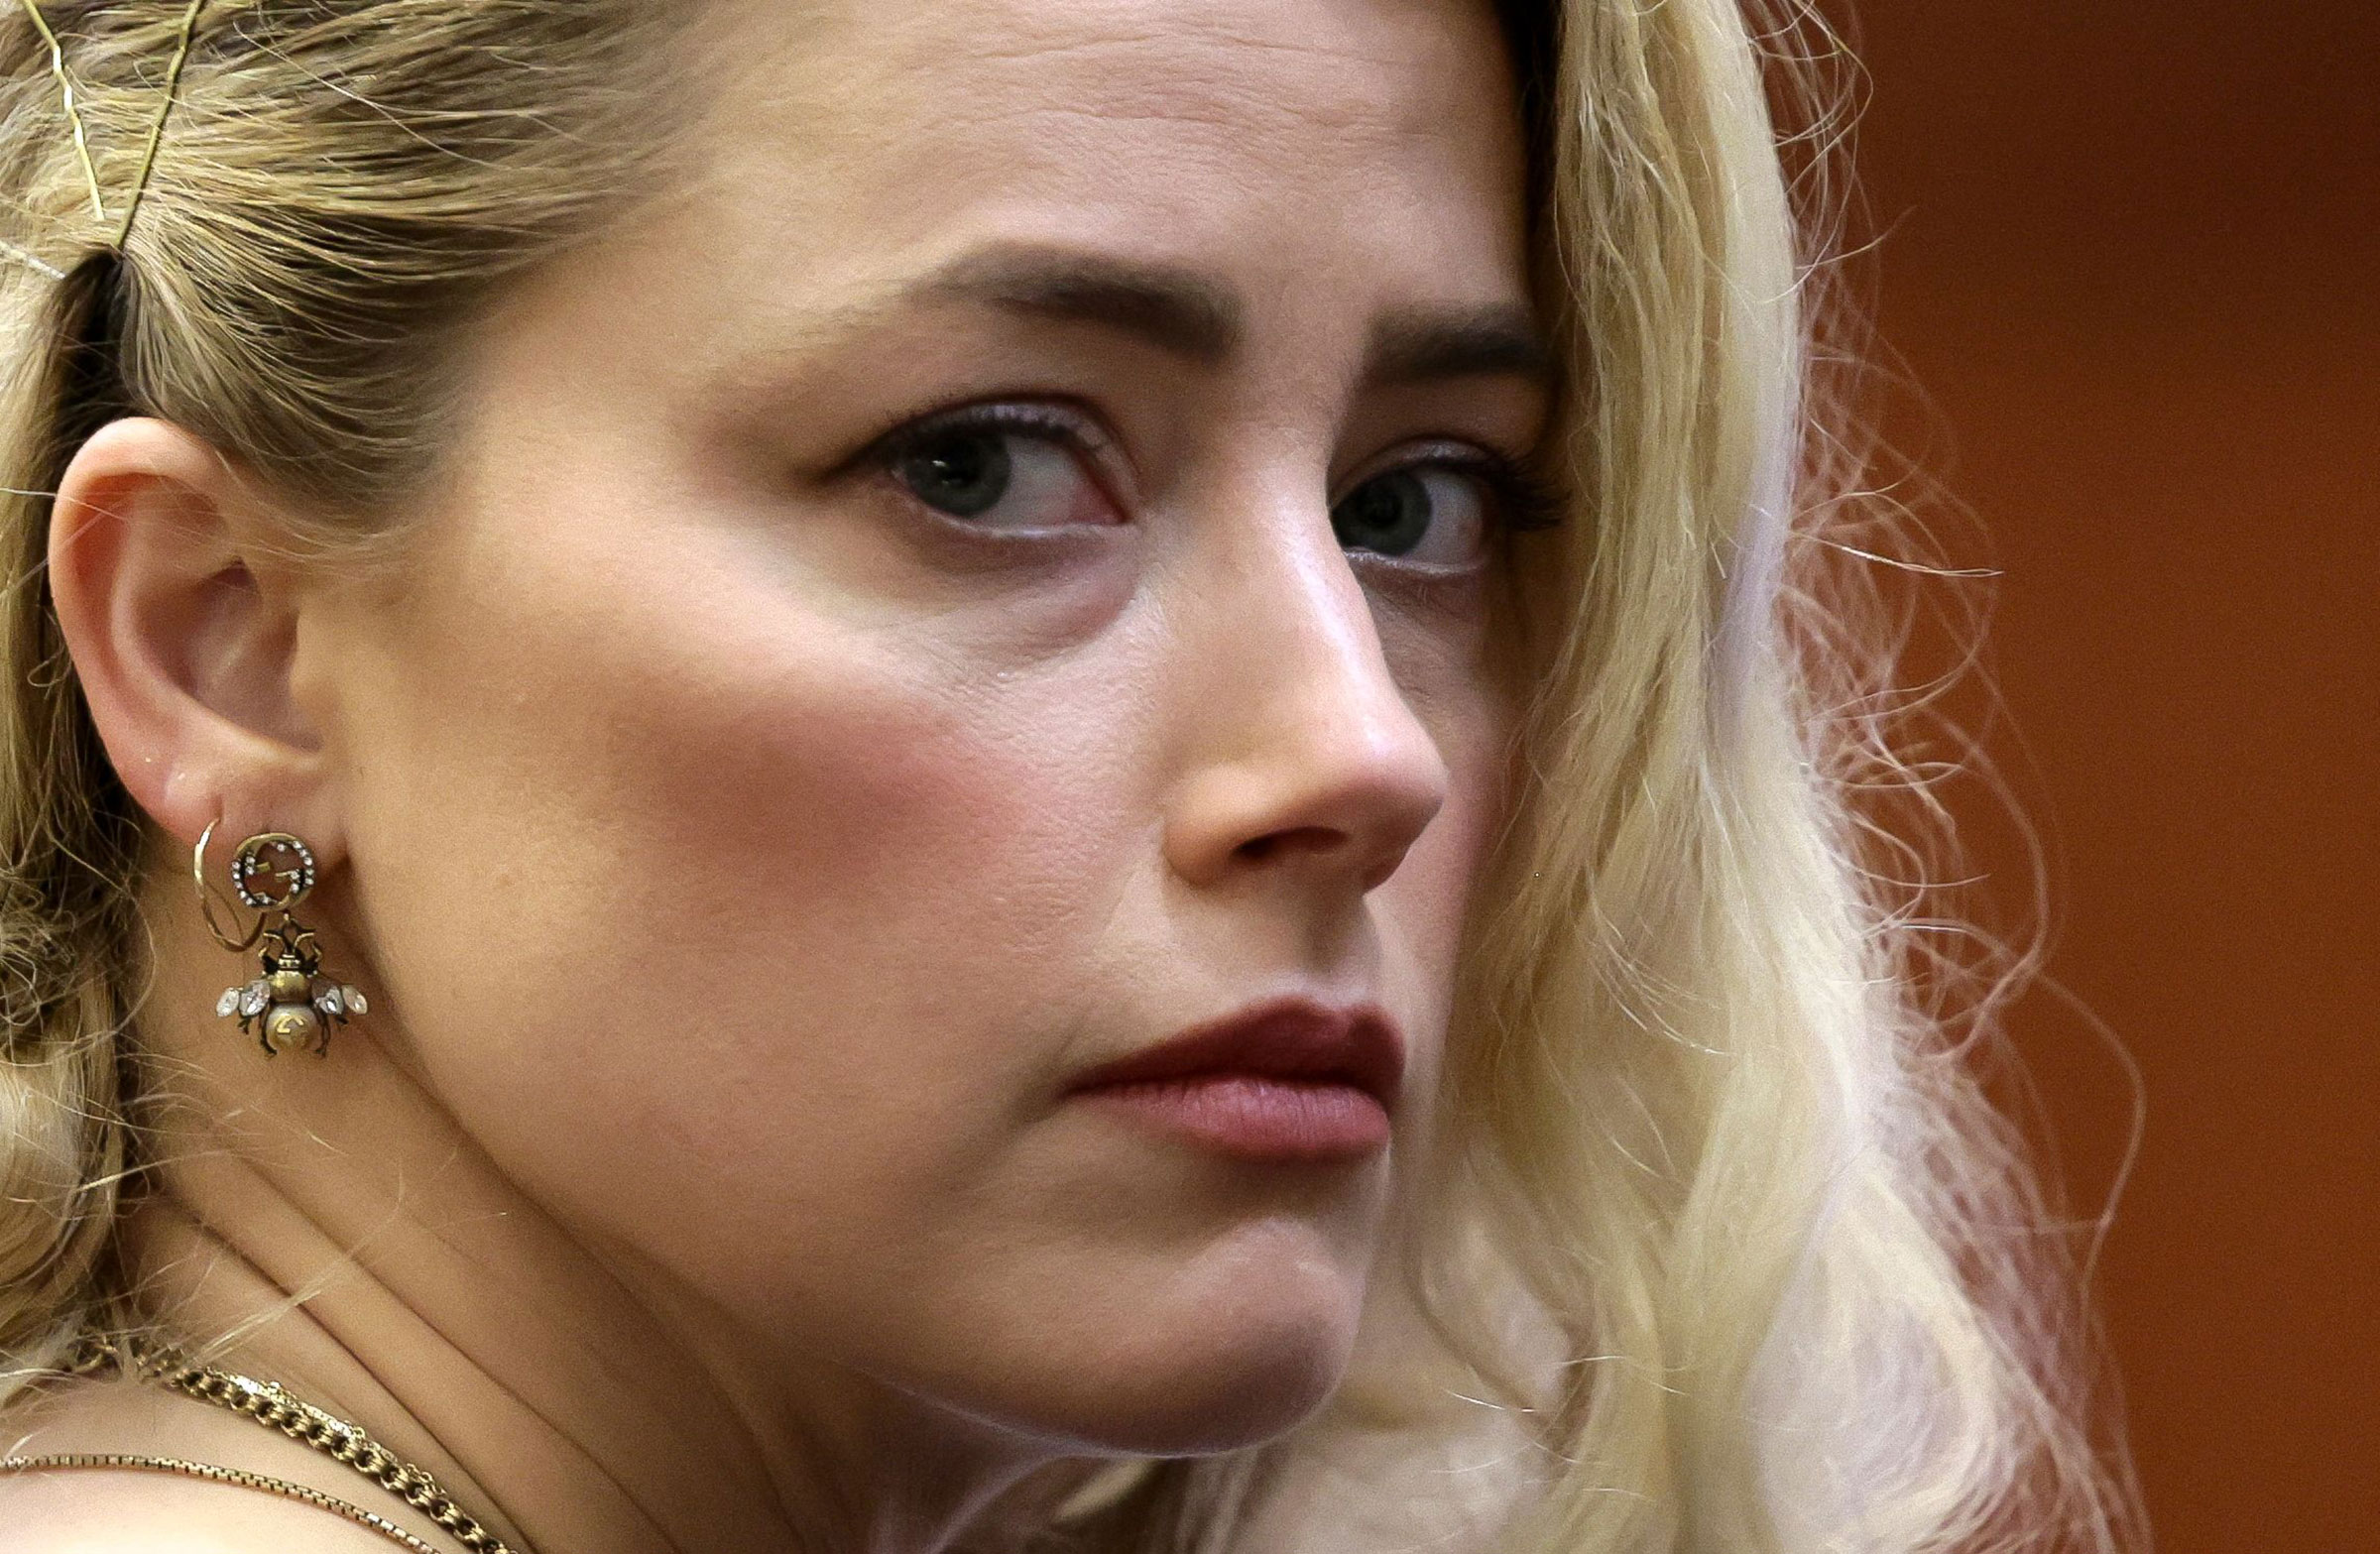 Amber Heard waits before the jury announced a split verdict in favor of both Johnny Depp and Amber Heard on their claim and counter-claim in the Depp v. Heard civil defamation trial at the Fairfax County Circuit Courthouse in Fairfax, Va., on June 1, 2022. (Evelyn Hockstein—Pool/AFP/Getty Images)